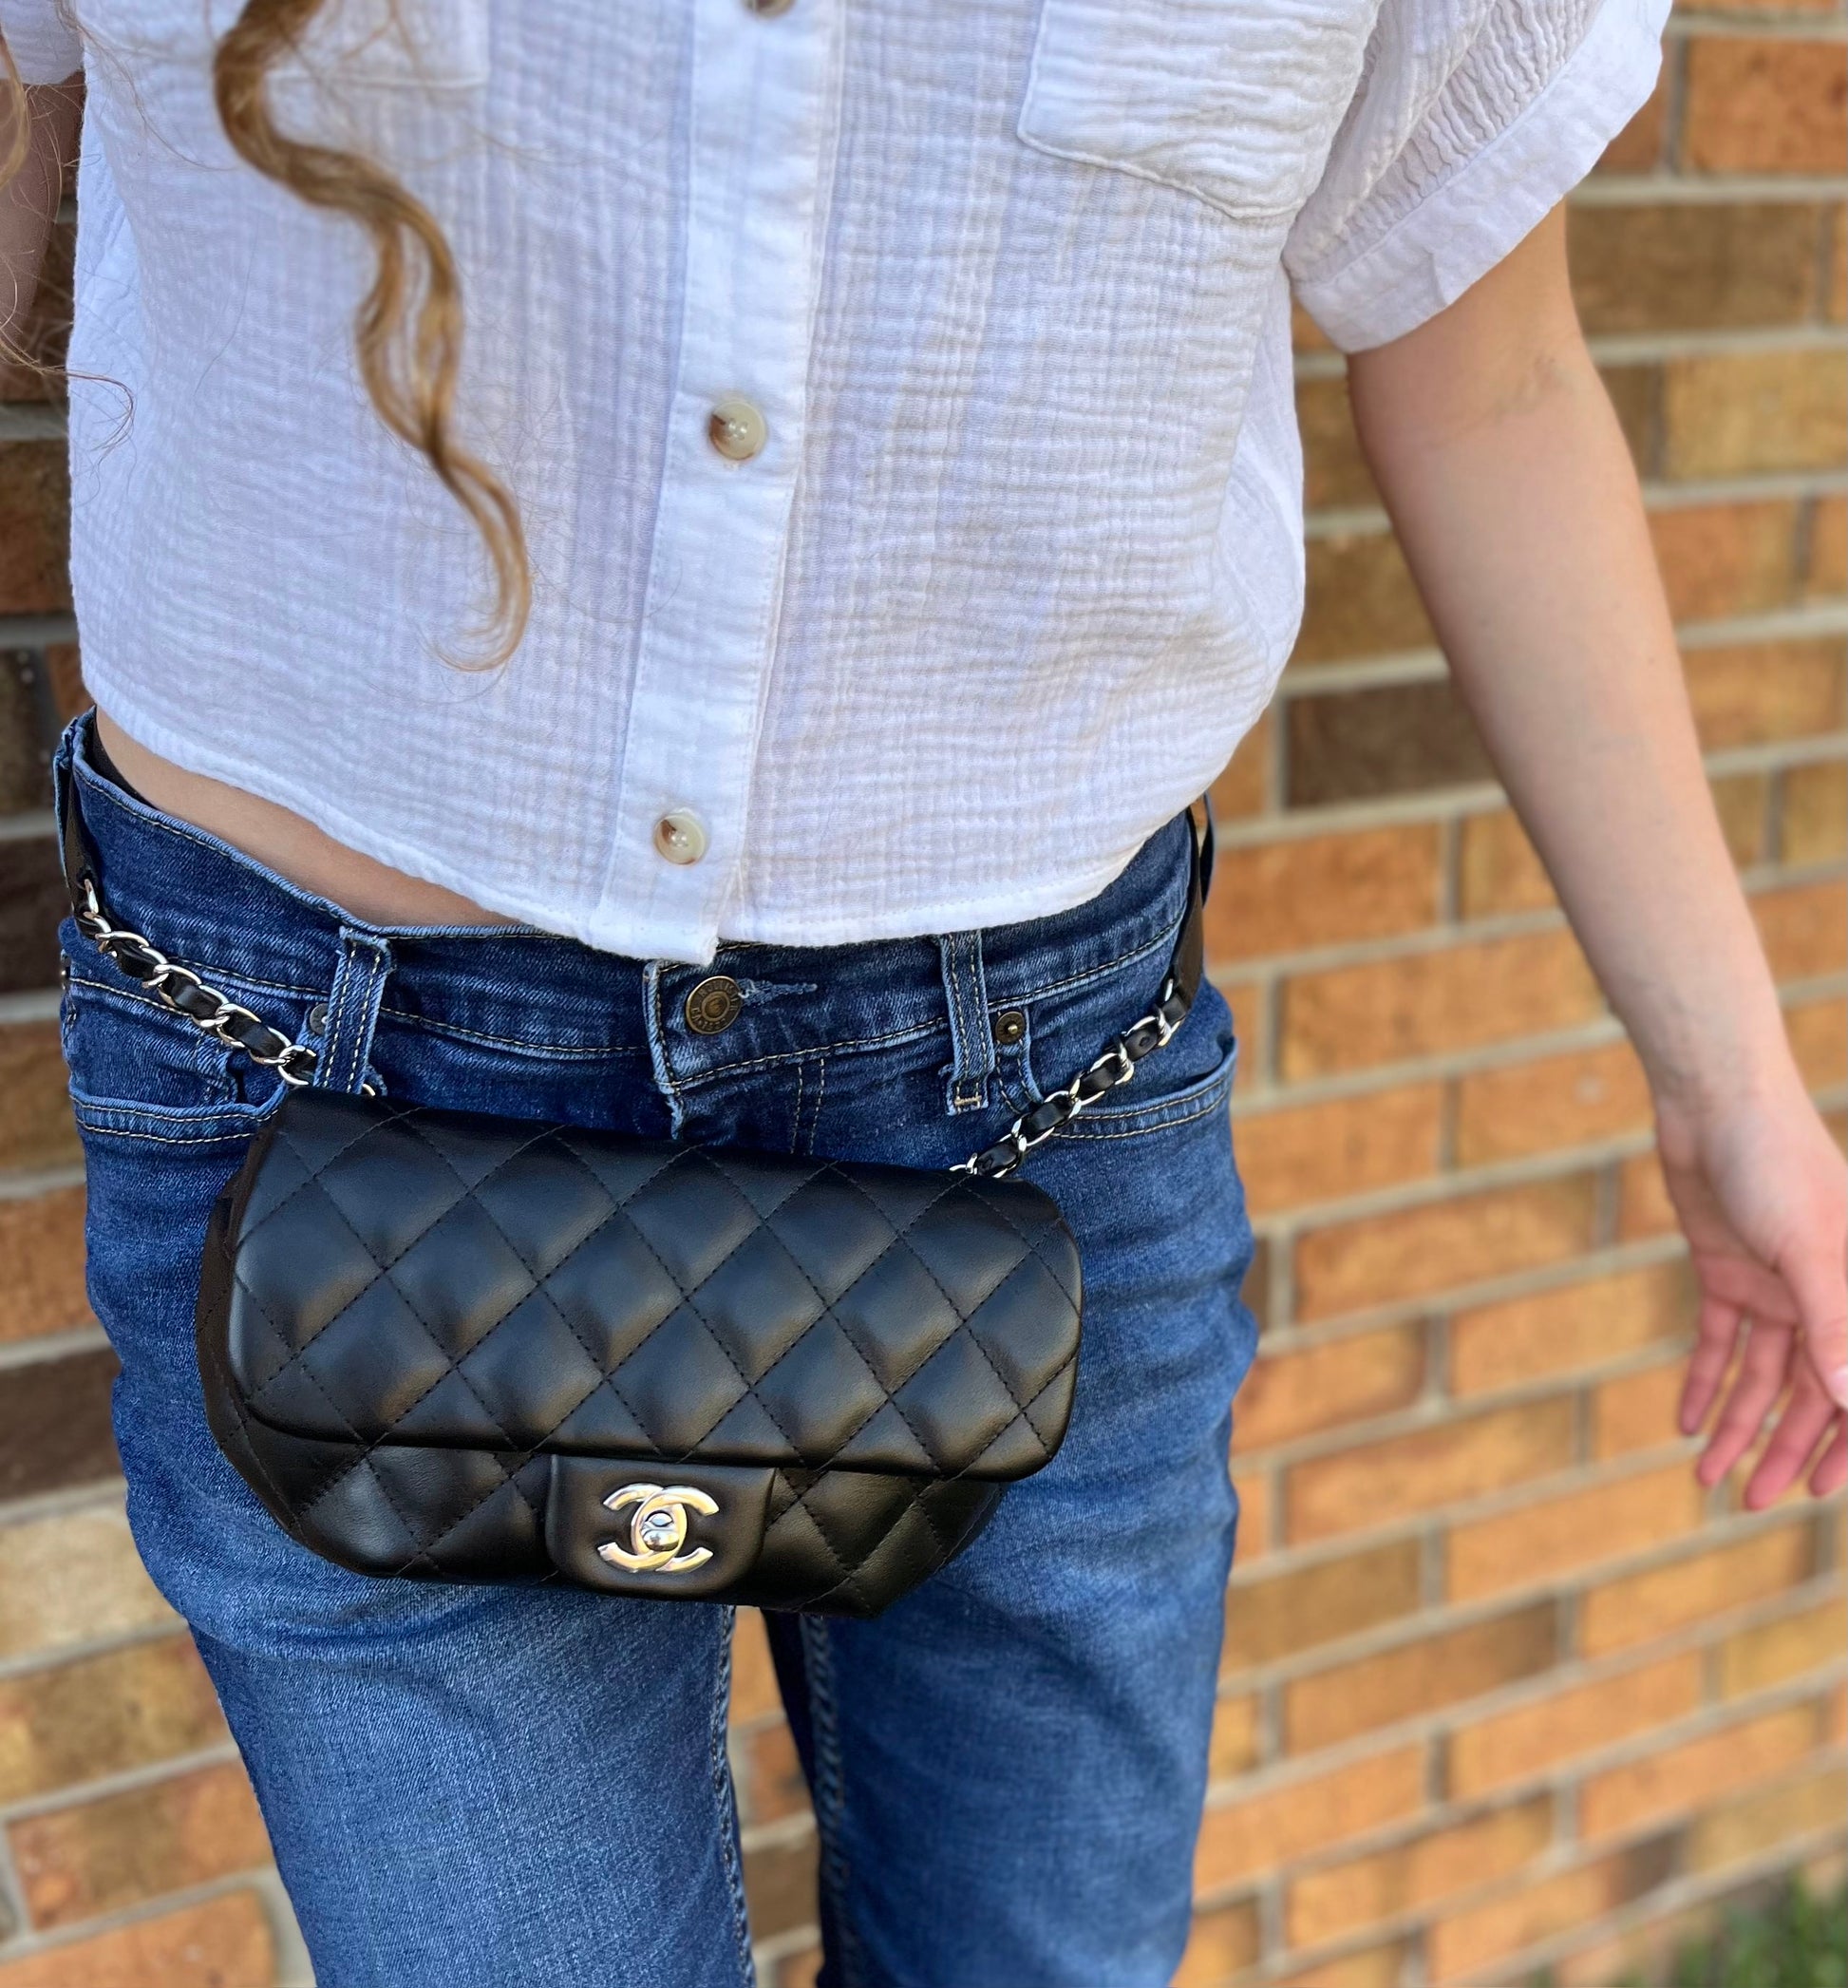 Chanel Medium Double Flap Review + Tips for Buying Second Hand, Connecticut Fashion and Lifestyle Blog